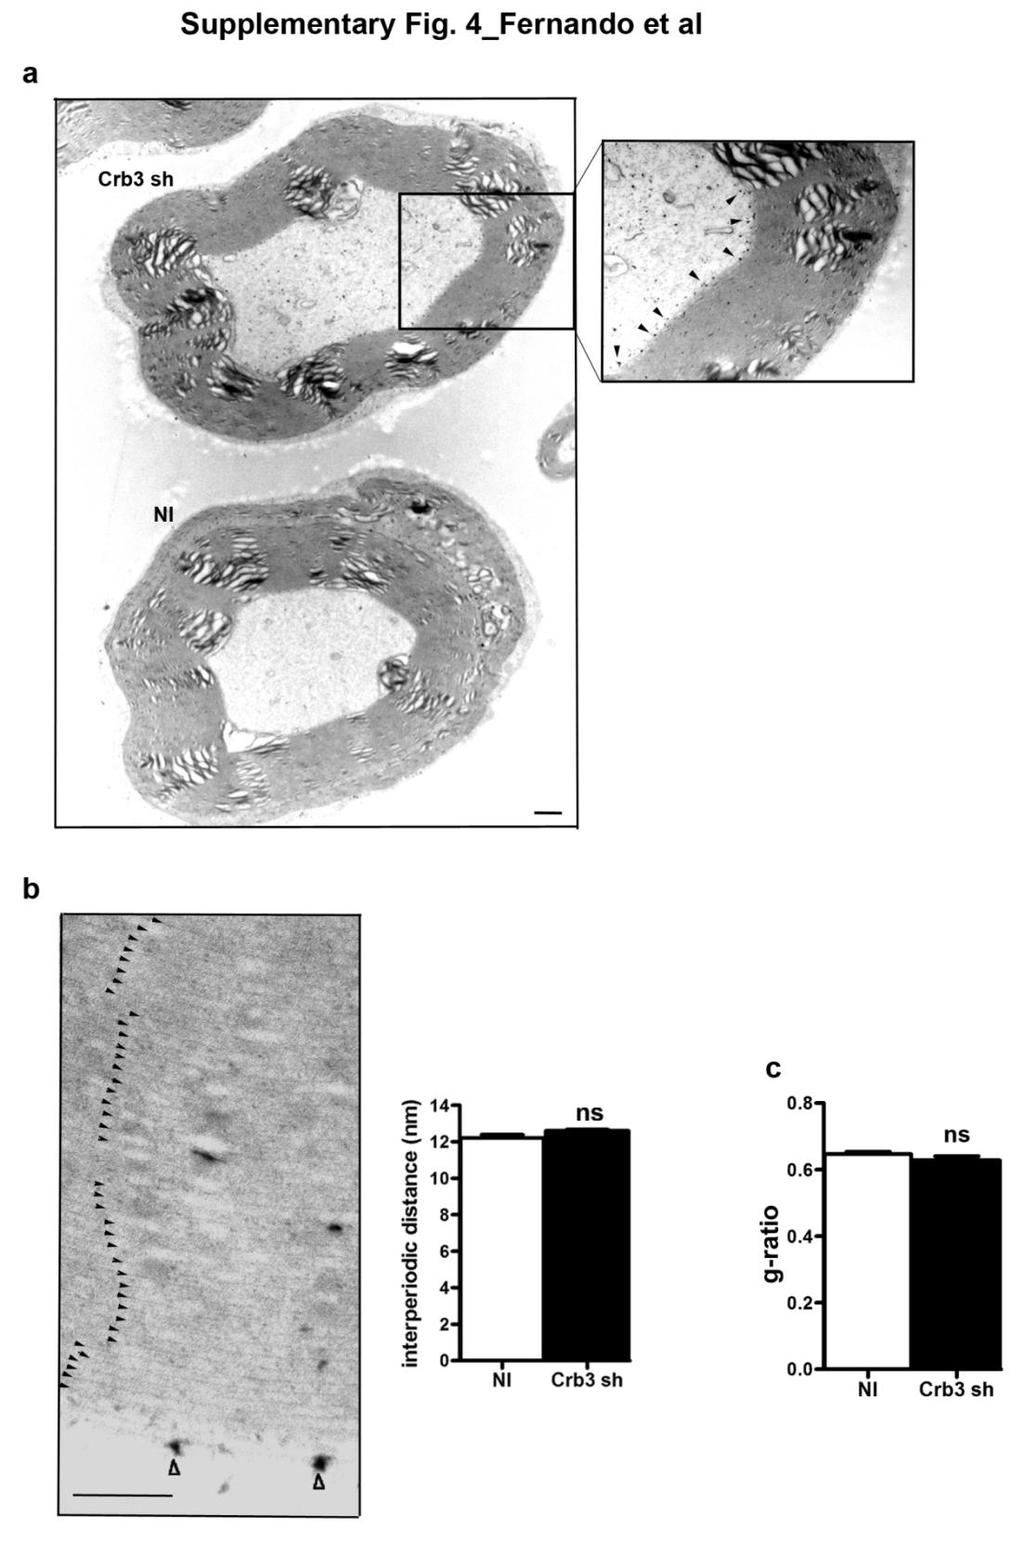 Supplementary Figure 4 Crb3-silencing does not alter the myelin ultrastructure, interperiodic distance or the myelin g-ratio (a) Electron microscopy picture showing two adjacent myelinated fibers in